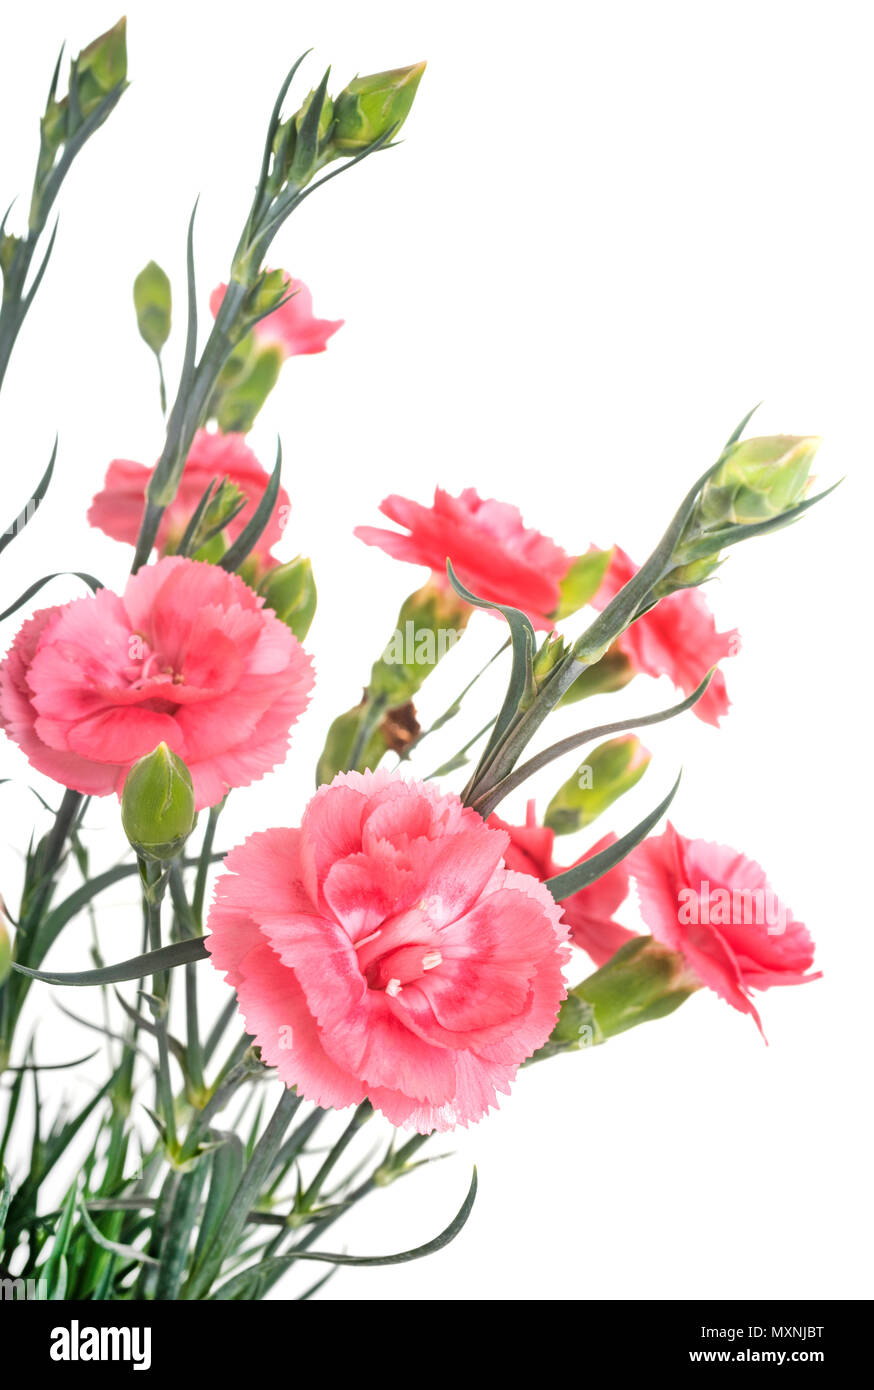 dianthus plant in front of white background Stock Photo